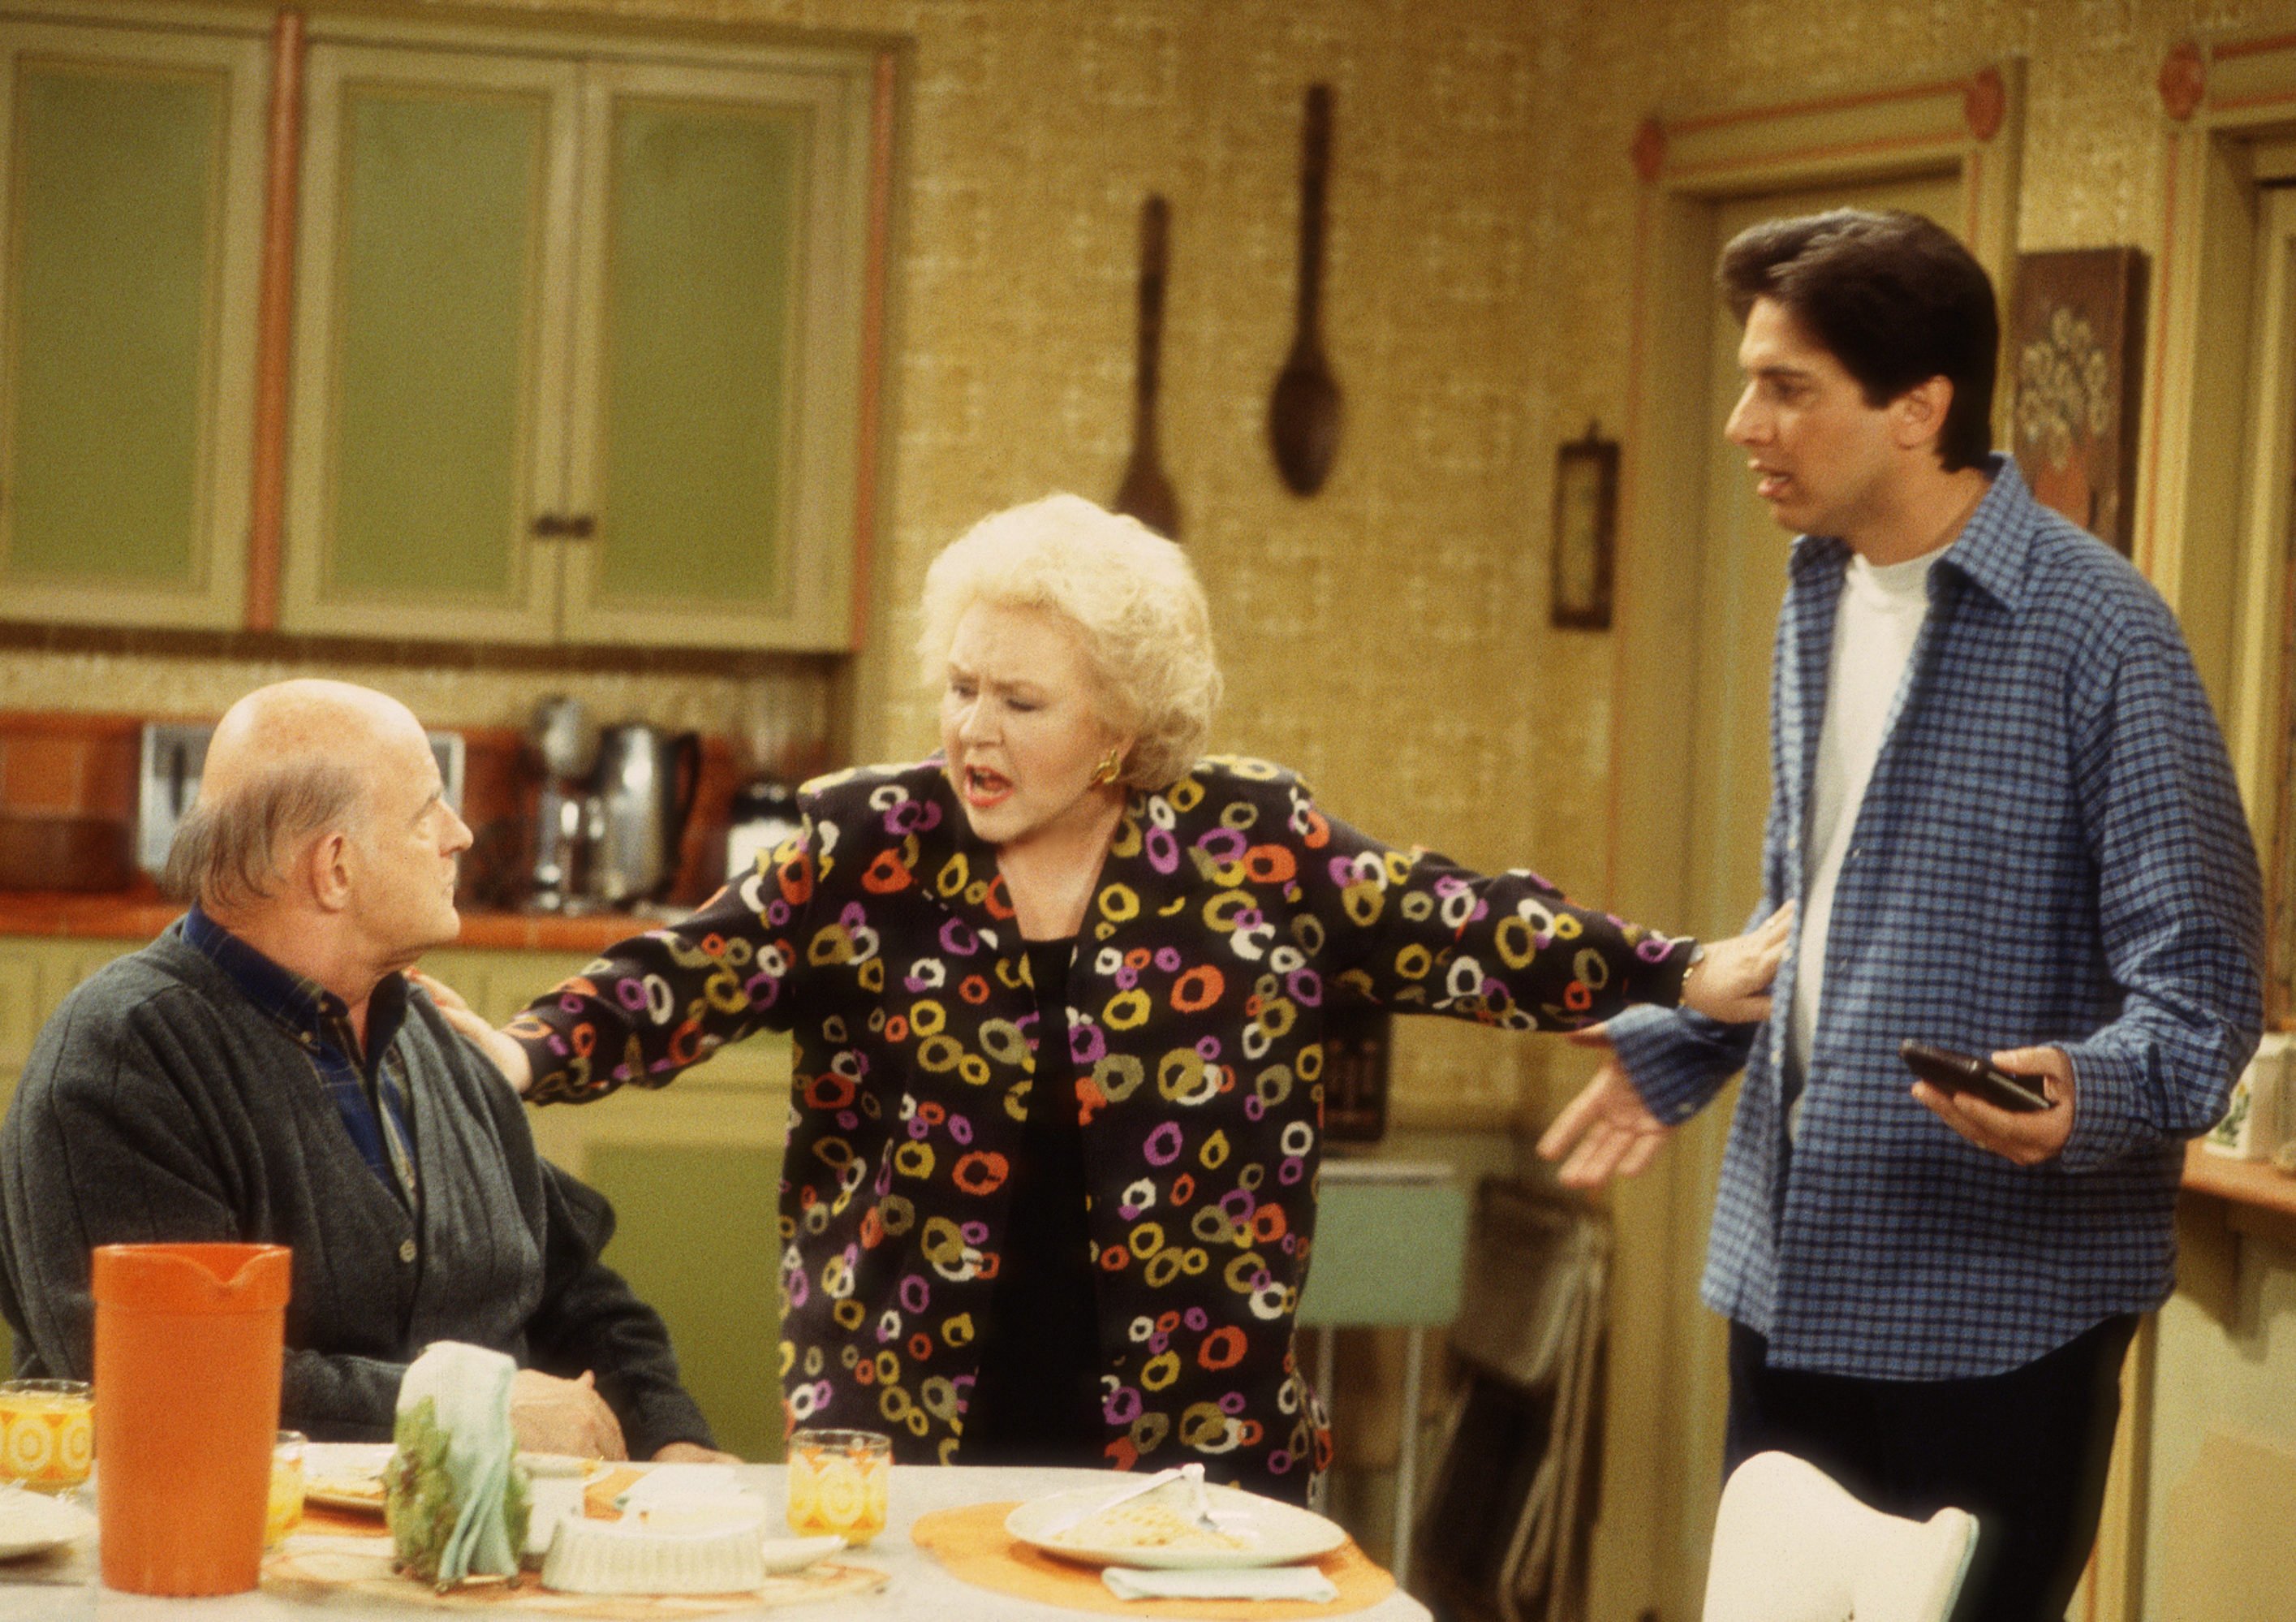 From left, Peter Boyle, Doris Roberts, and Ray Romano in a scene from 'Everybody Loves Raymond'